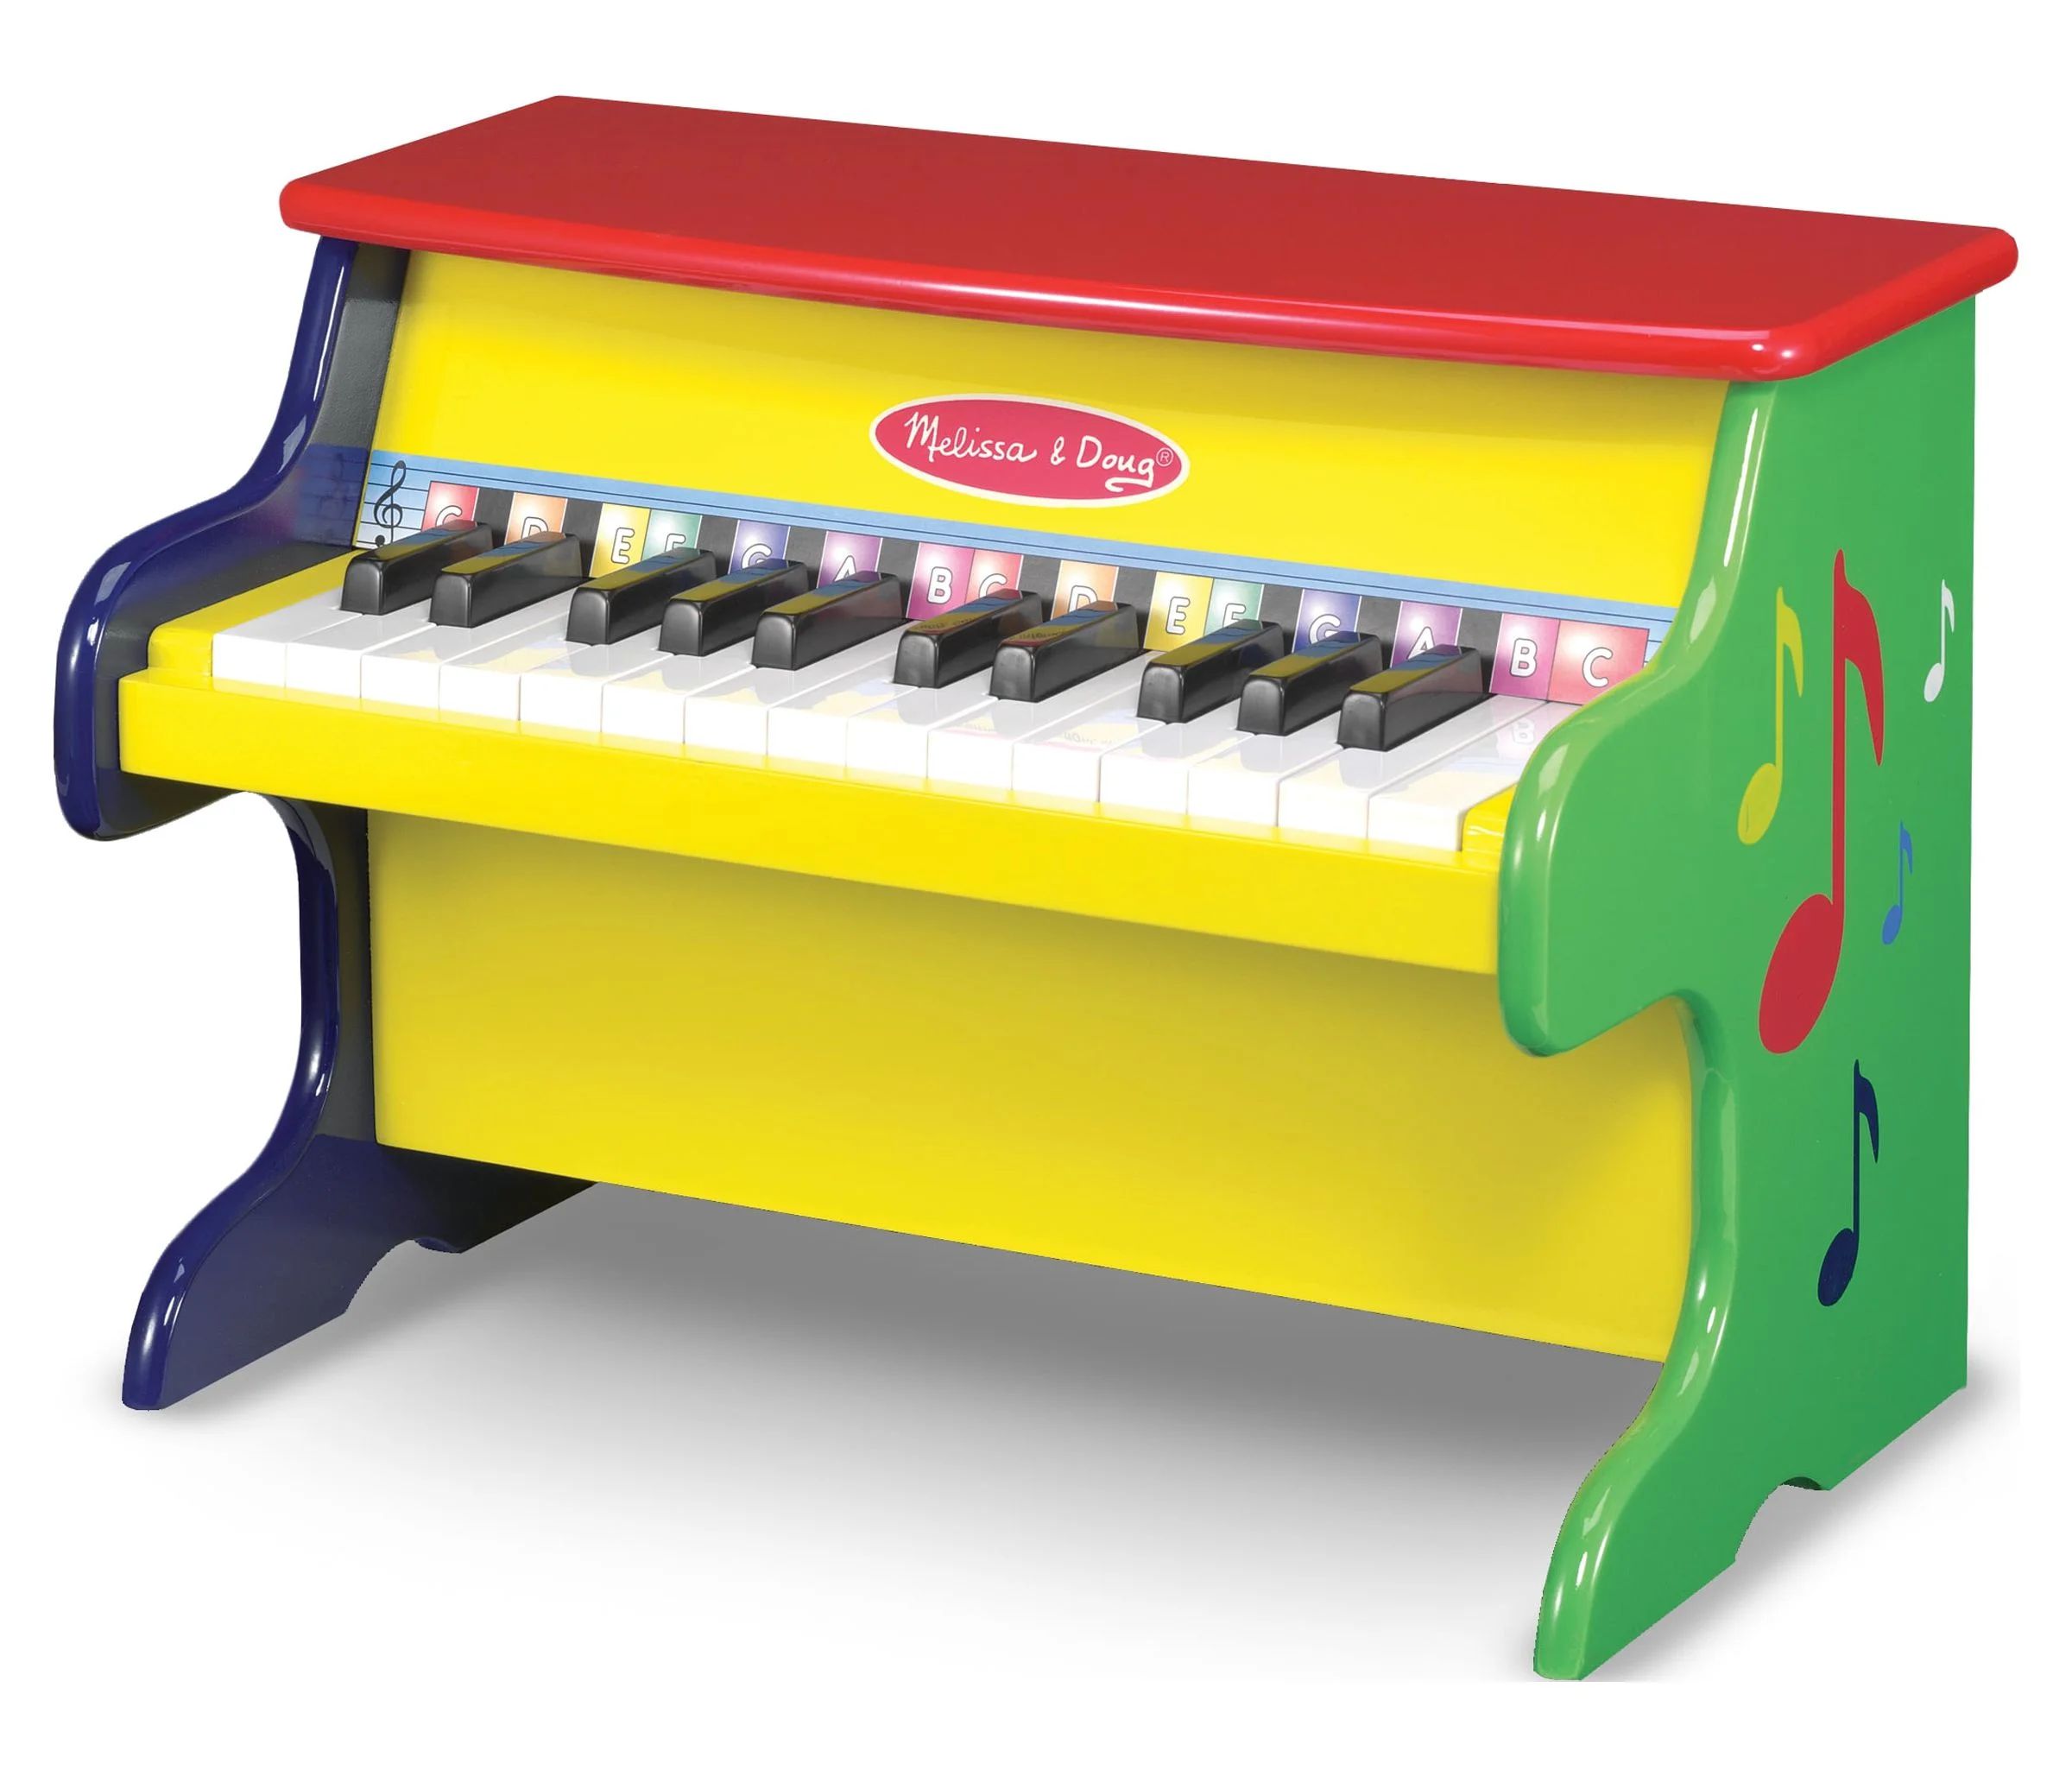 Melissa & Doug Learn-To-Play Piano With 25 Keys and Color-Coded Songbook | Walmart (US)